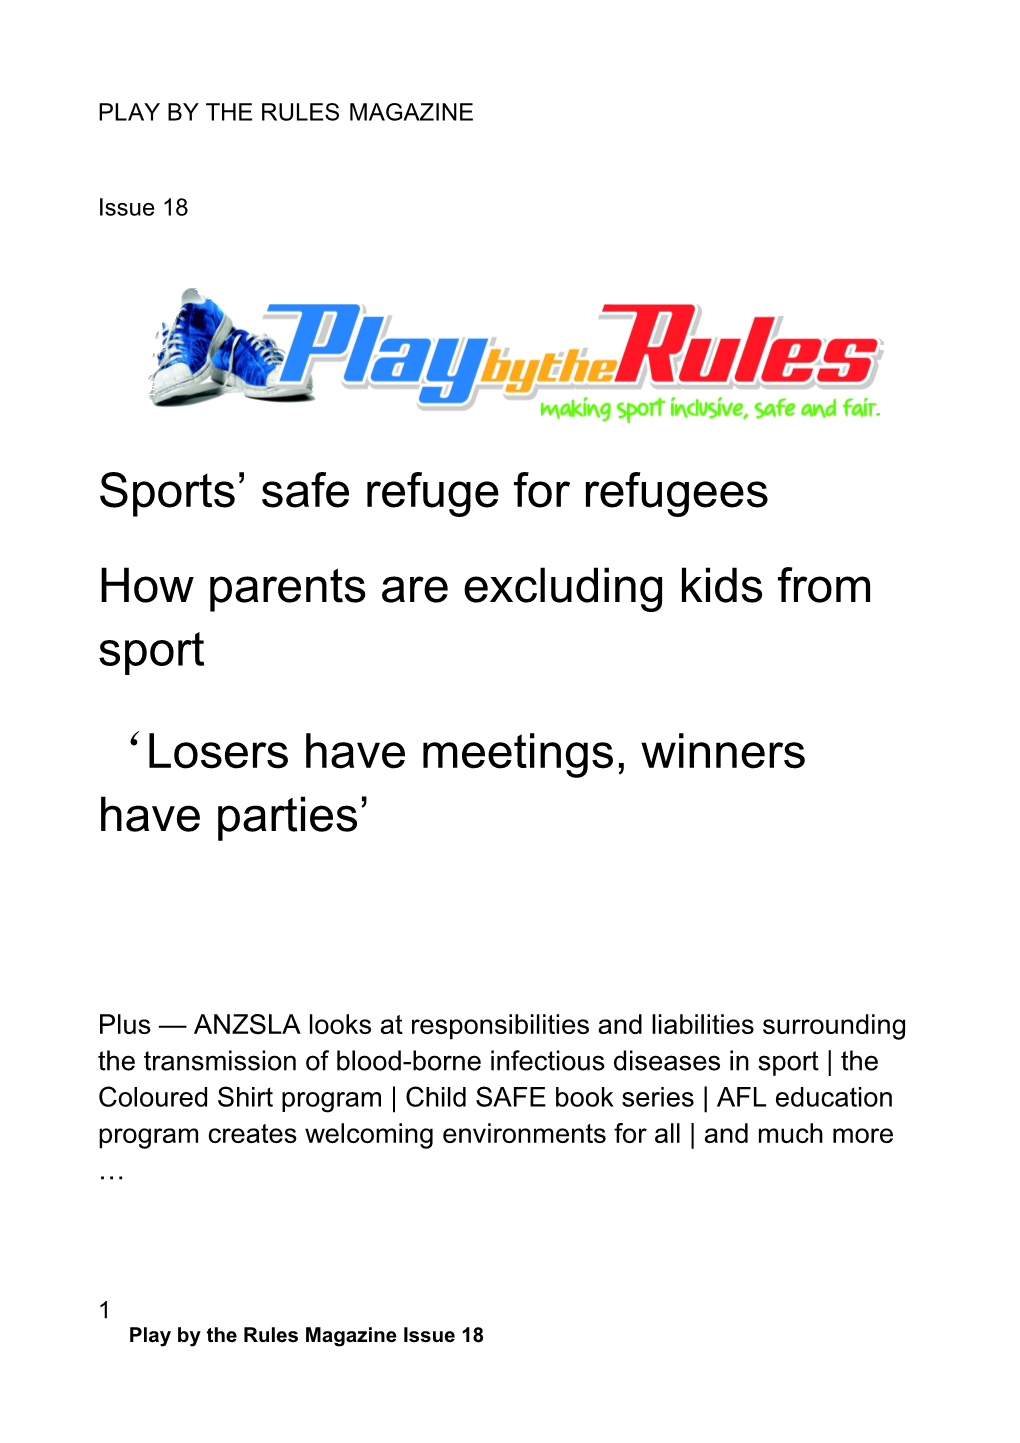 How Parents Are Excluding Kids from Sport